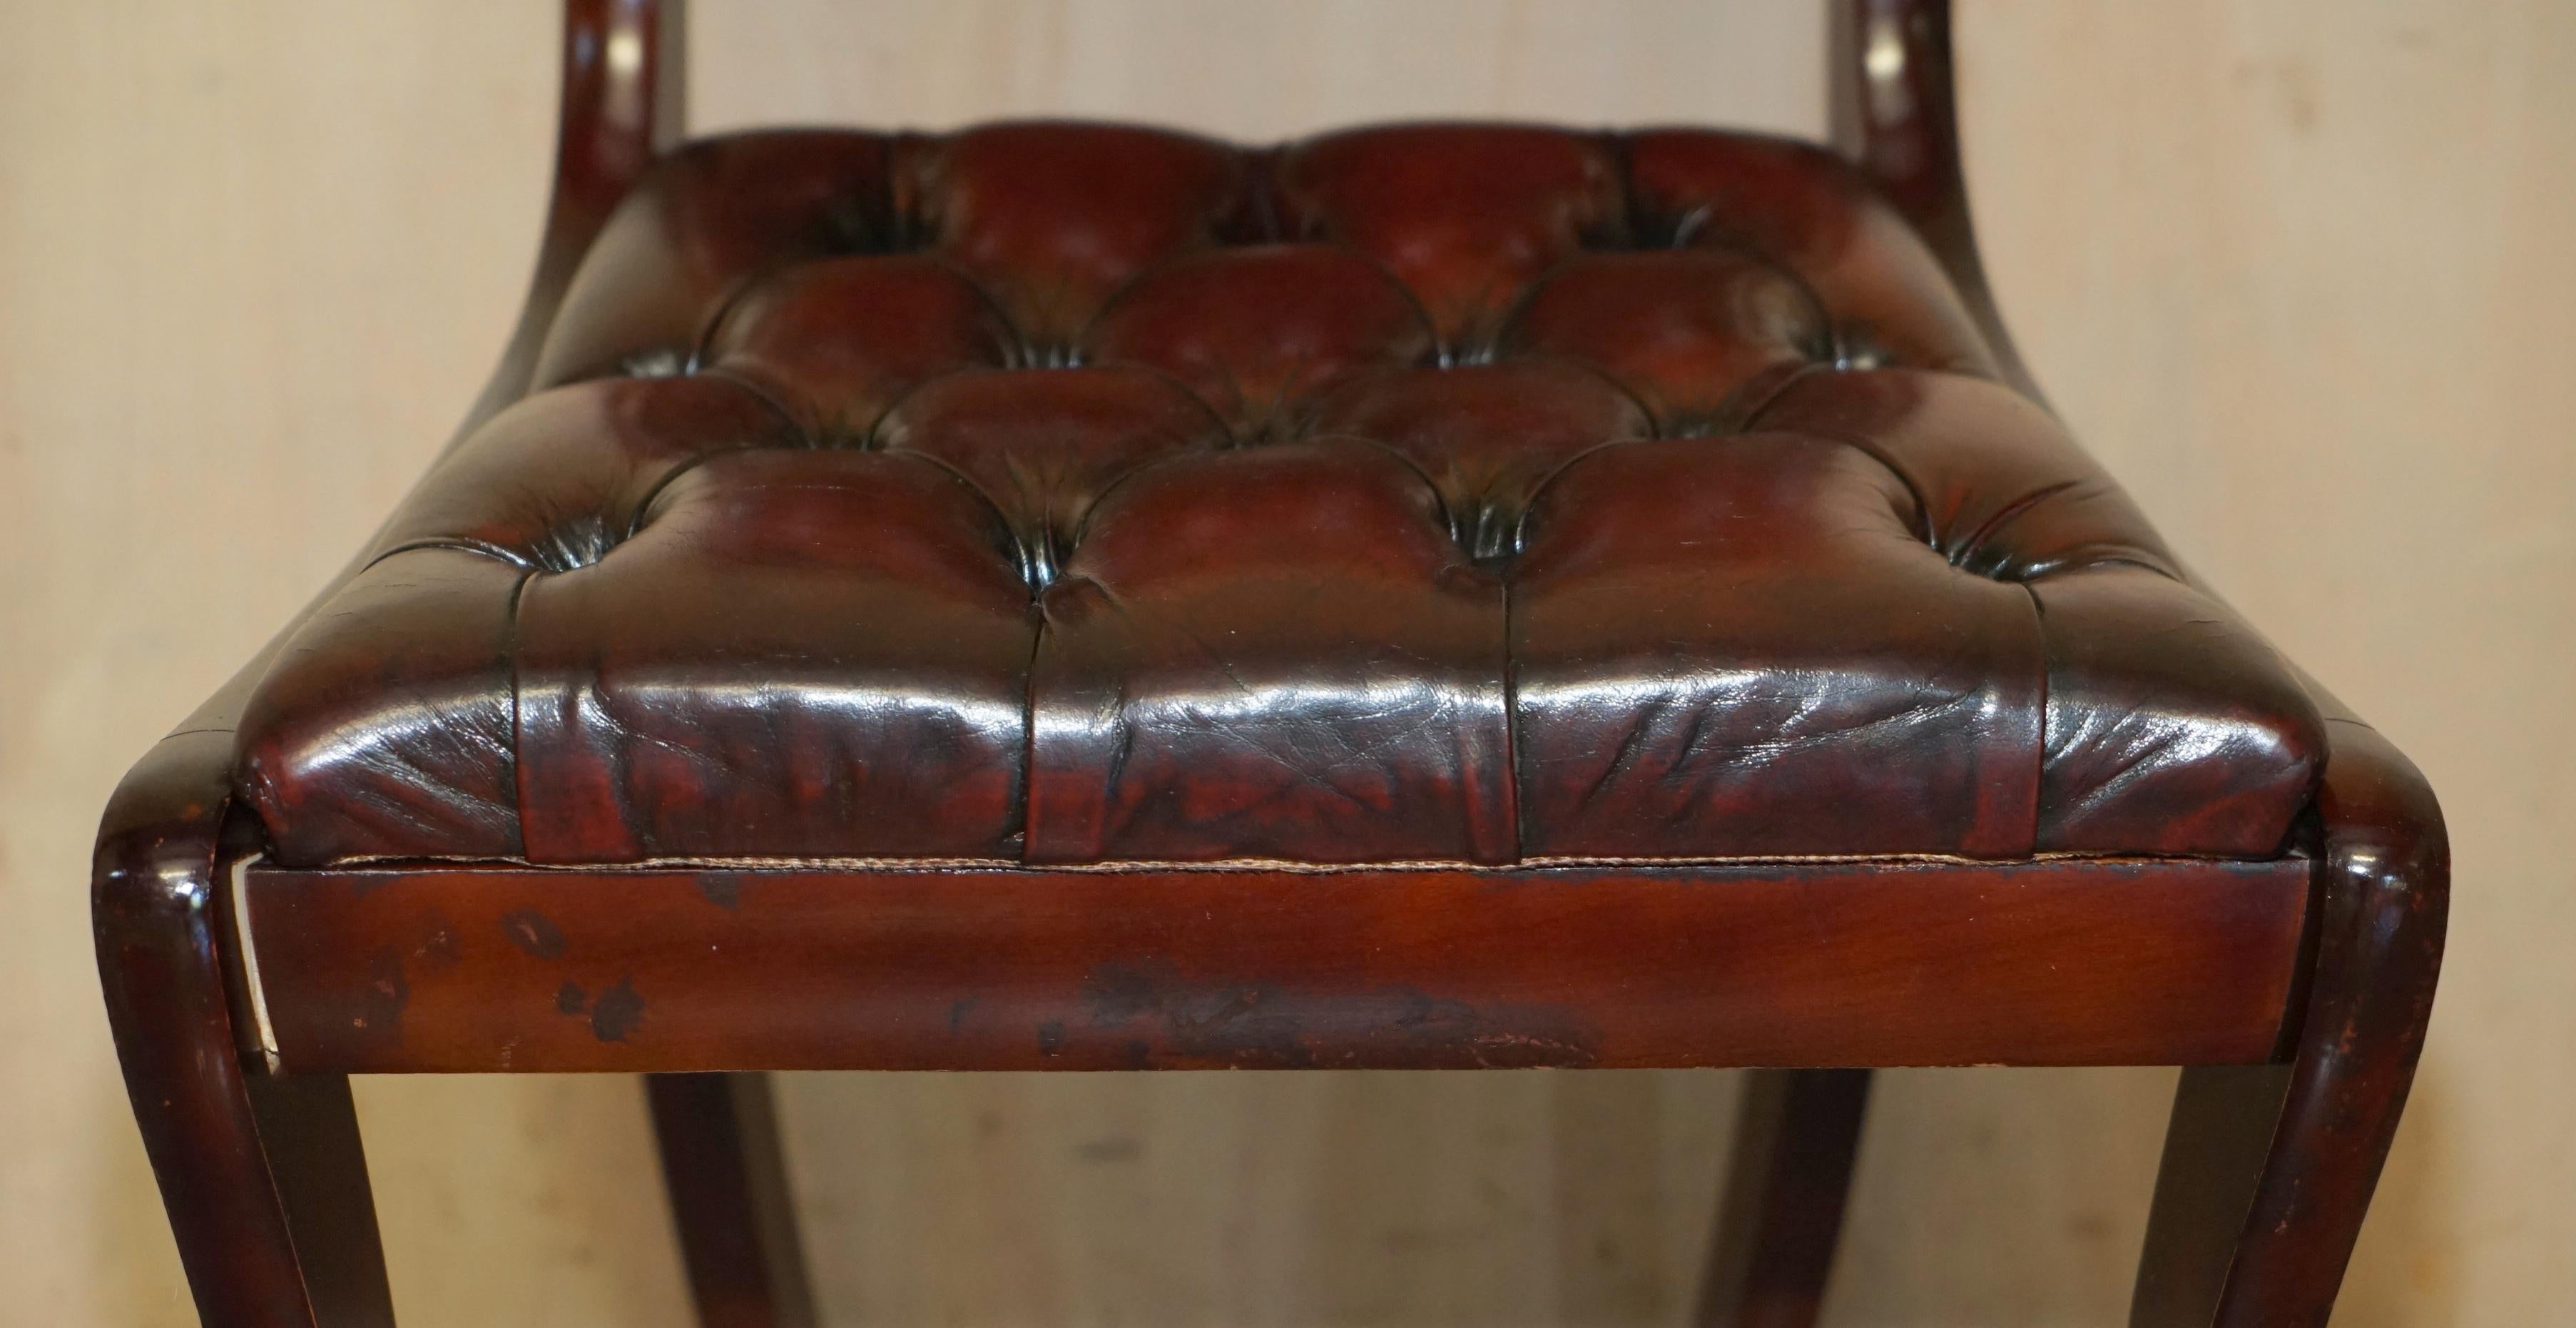 SIX VINTAGE HARDWOOD FULLY RESTORED CHESTERFIELD OXBOOD LEATHER DiNING CHAIRS 6 For Sale 3